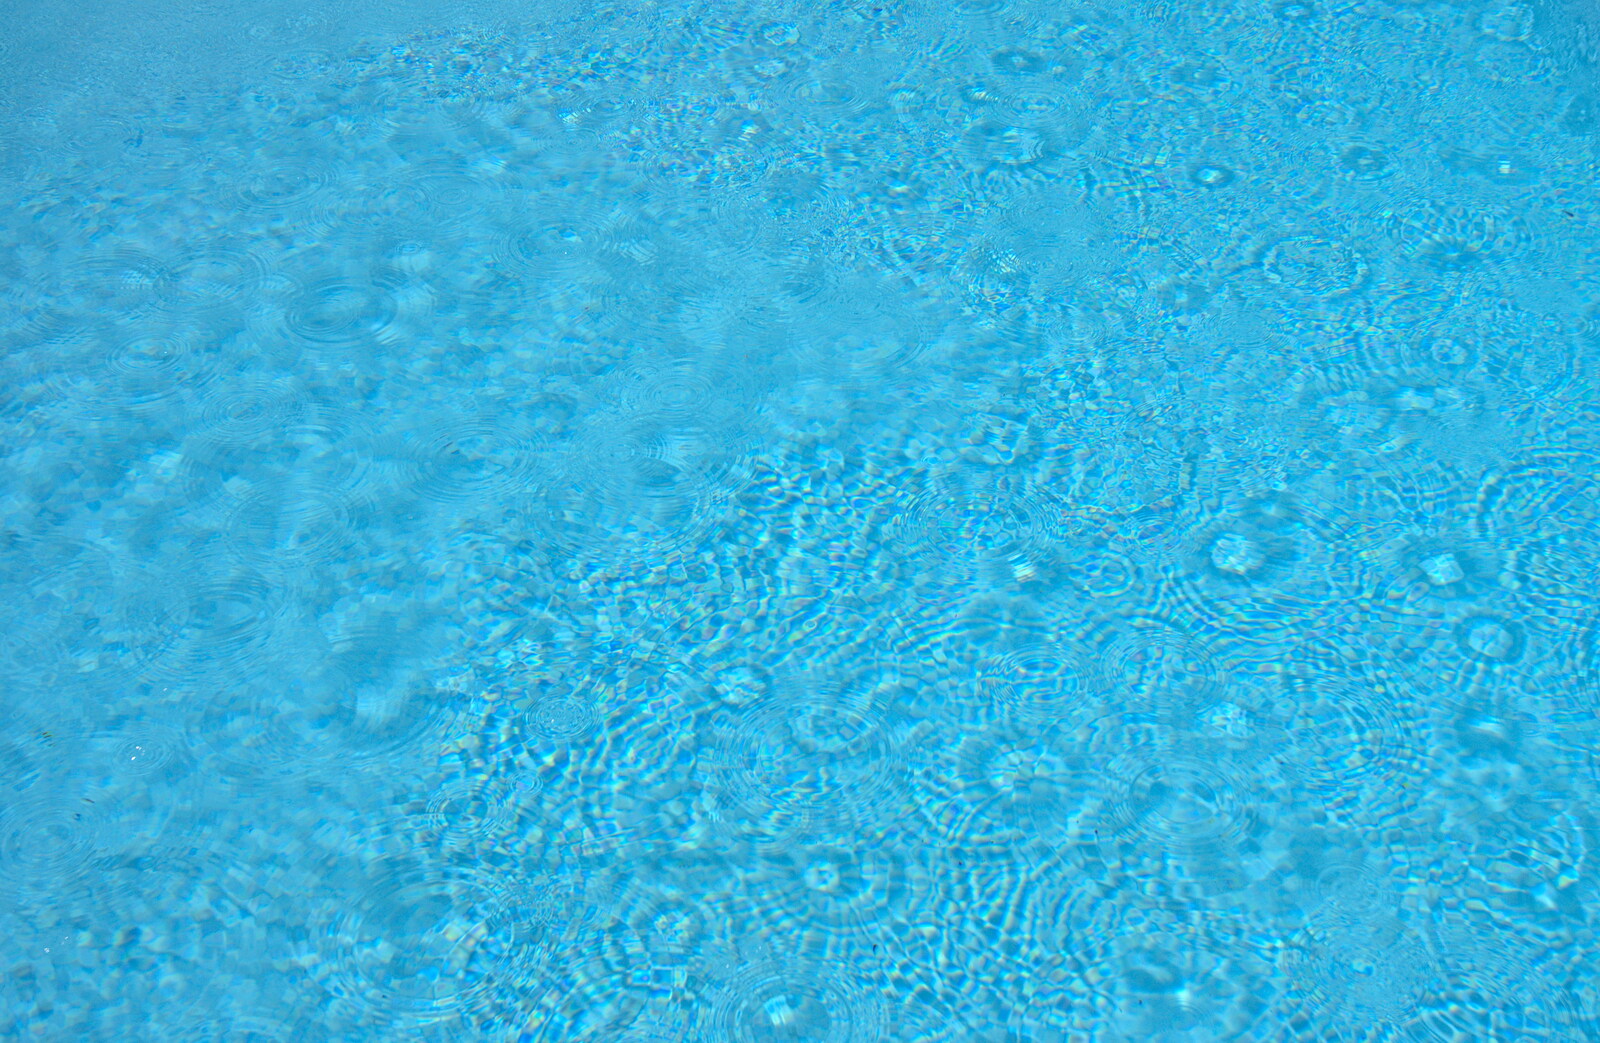 Drops of rain on a swimming pool from Italian Weddings, Saracens and Swimming Pools, Arezzo, Tuscany - 12th June 2013